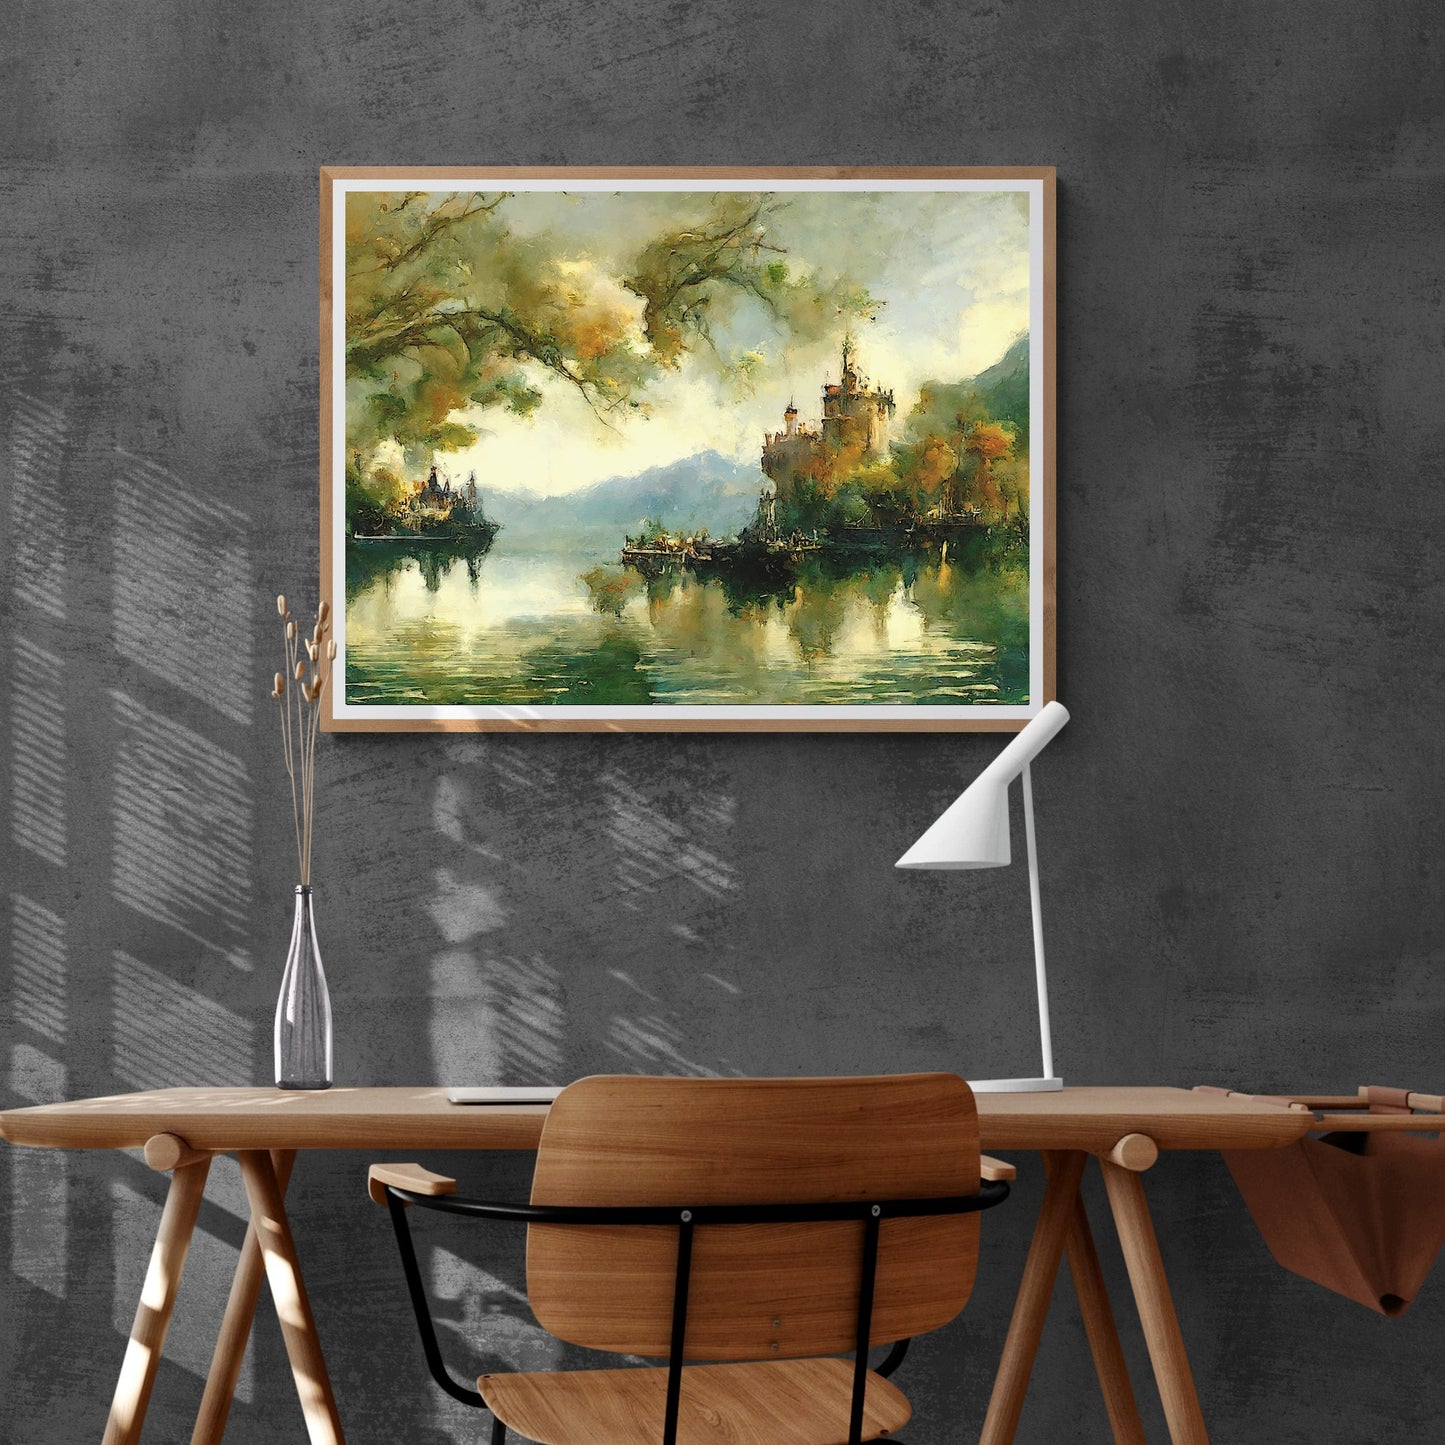 Castle by the Lake with Autumn Colors Paper Poster Prints Vintage Oil Painting Wall Art, Home Decor, Impressionistic Art, Lake Landscape Painting